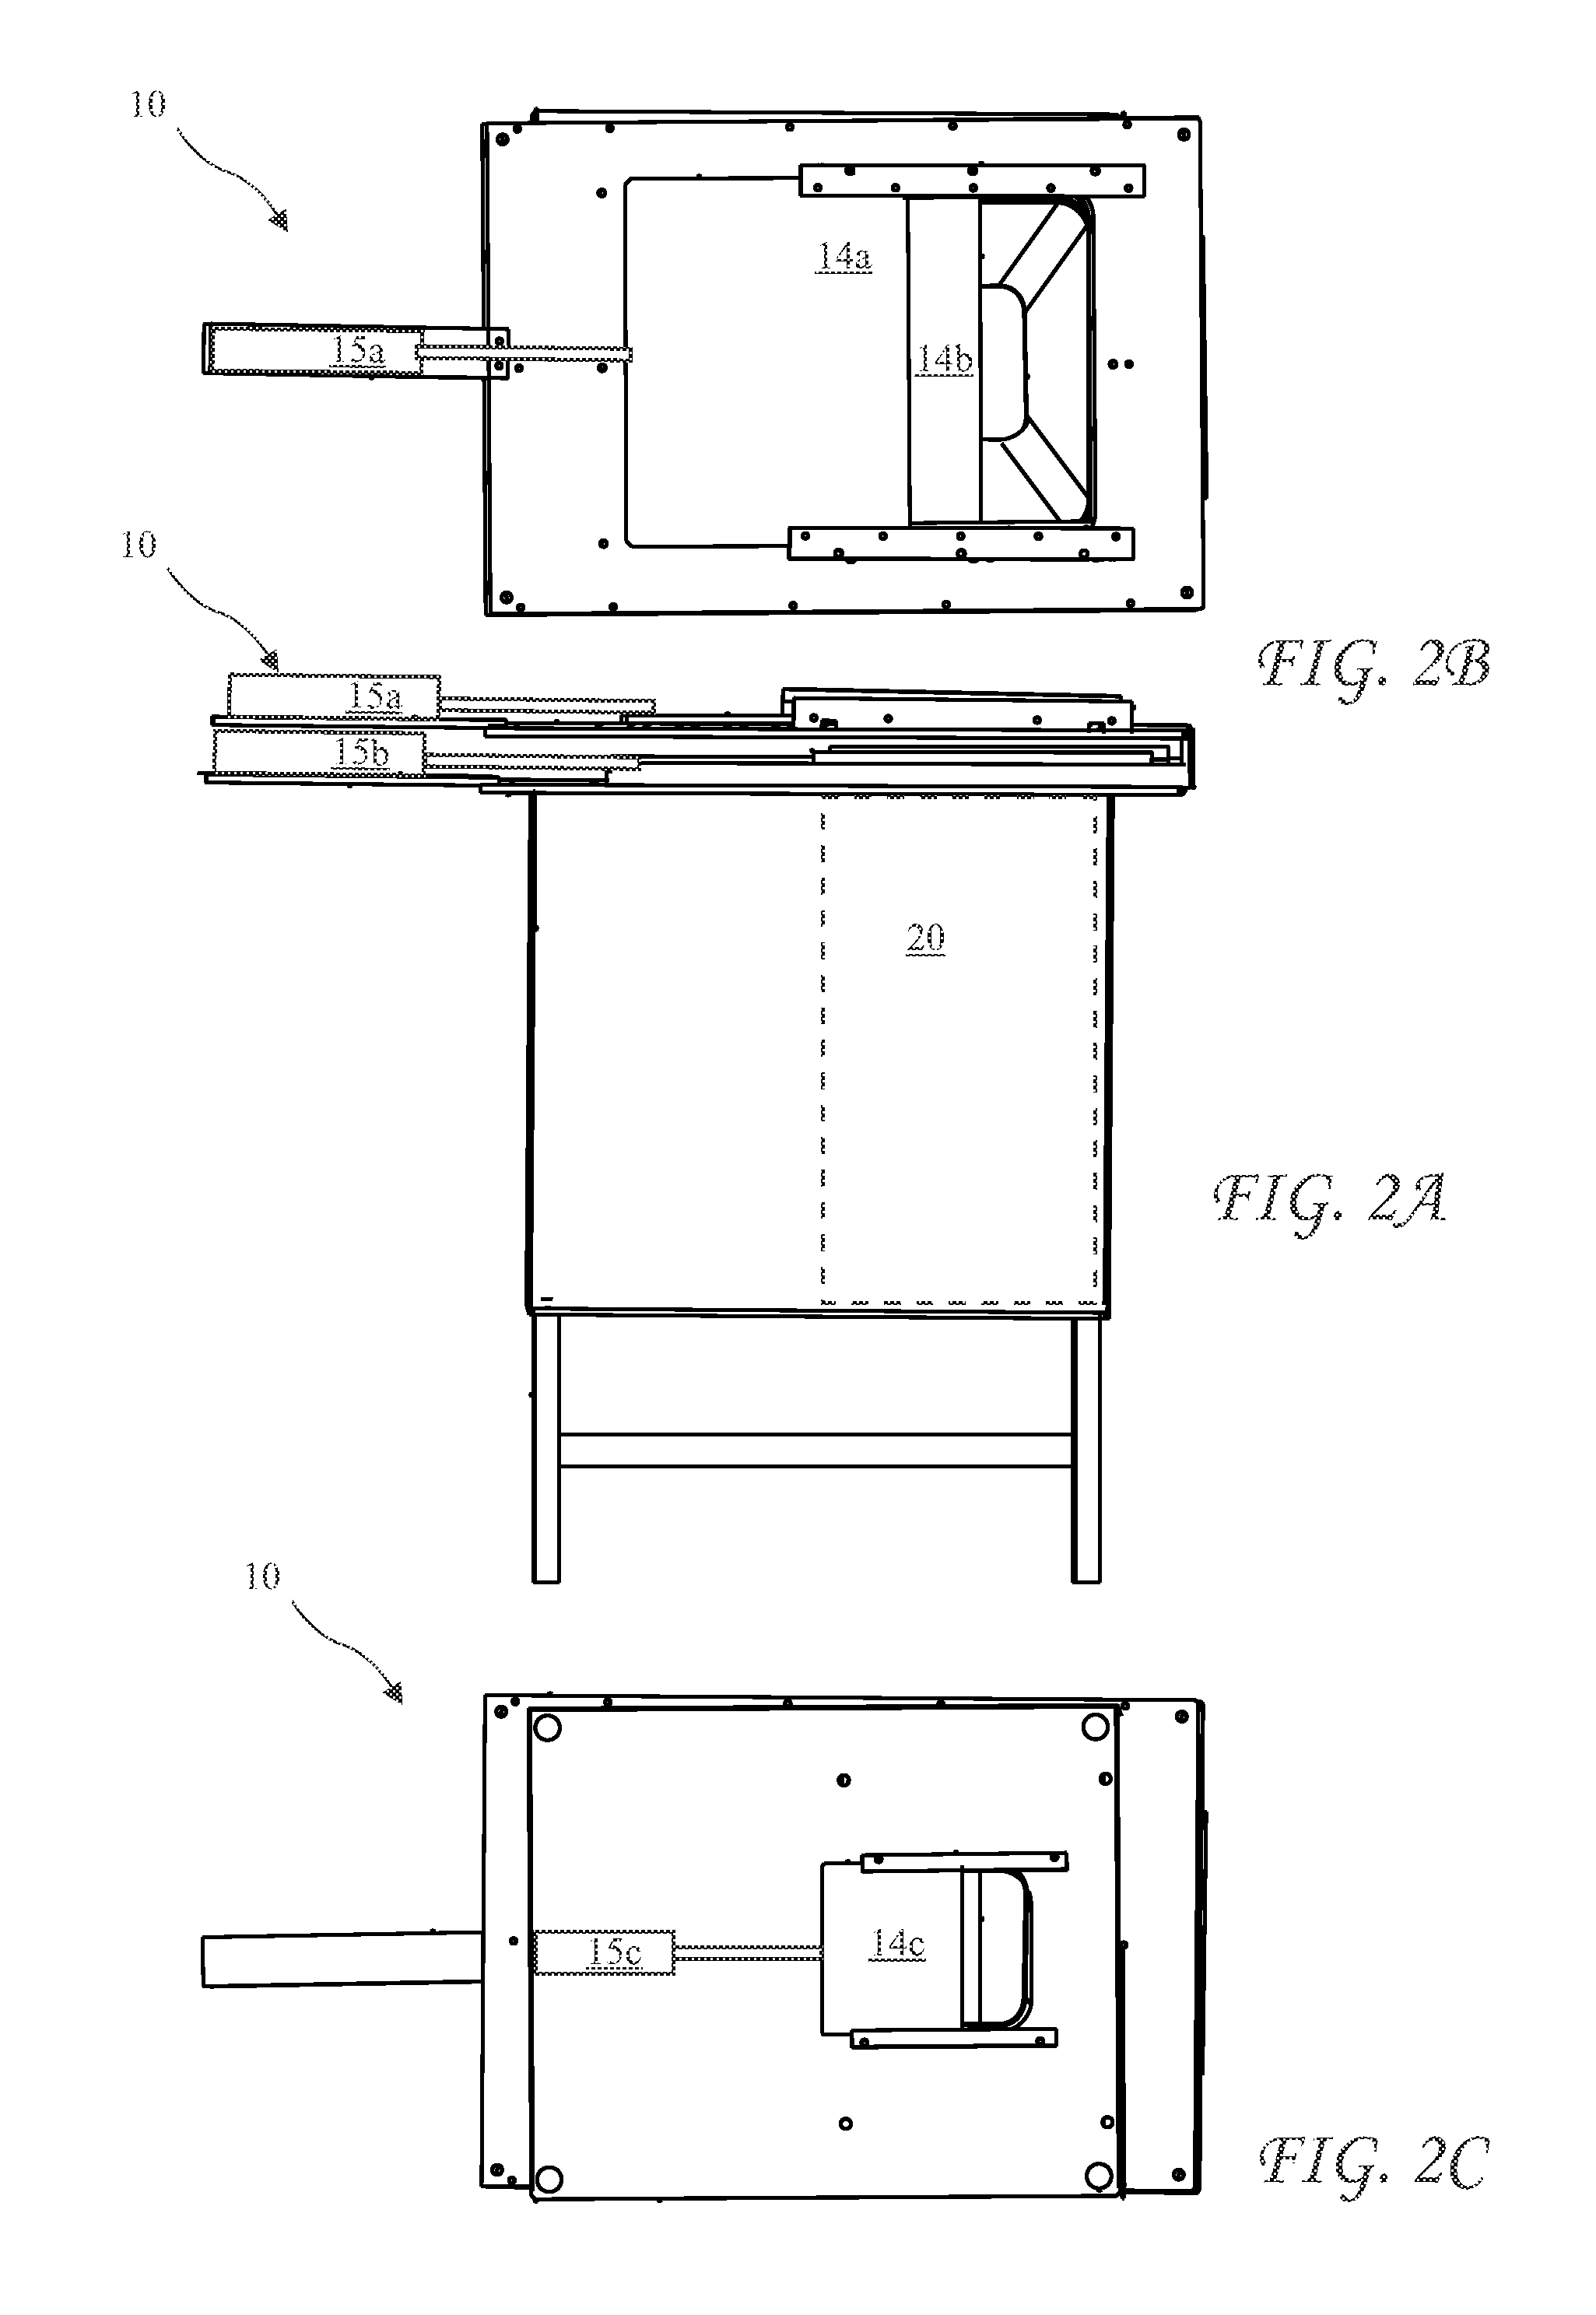 Apparatus and Method for On-site Disposal of Trace Chemo Containers and Waste, Expired Pharmaceuticals, and Sharps Containers and Sharps